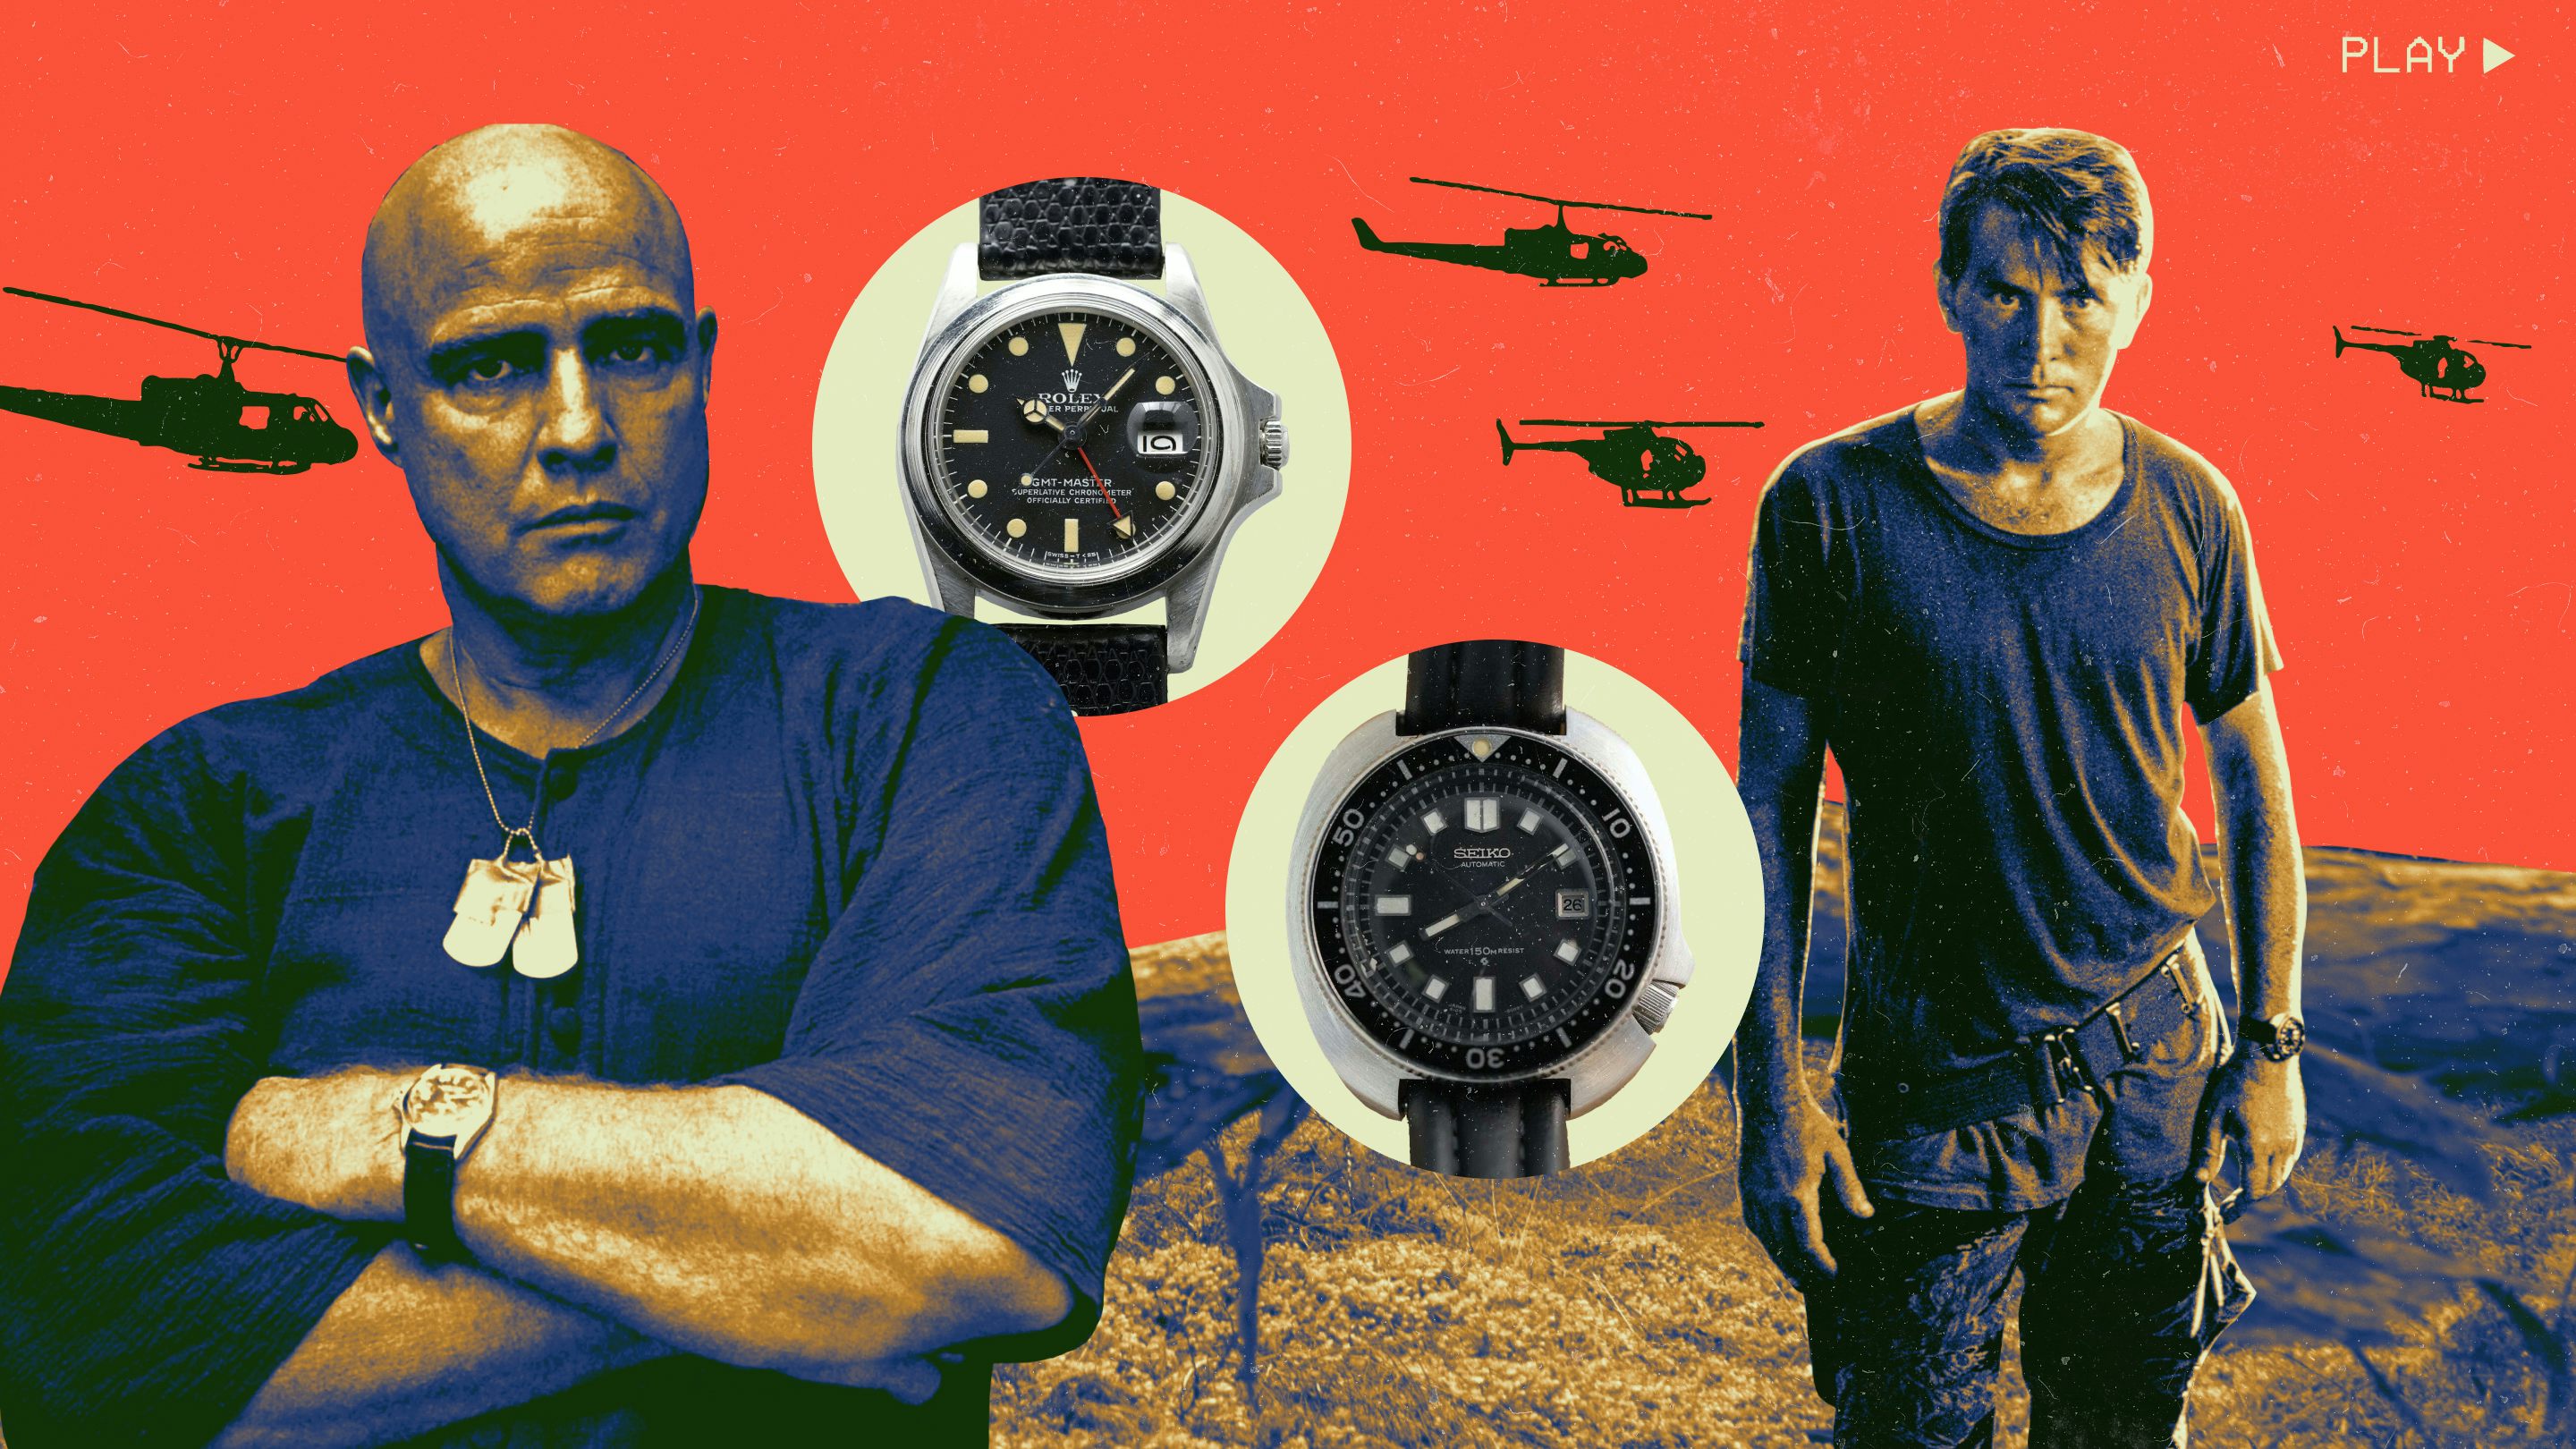 Just How Cool Are The Watches From Apocalypse Now?